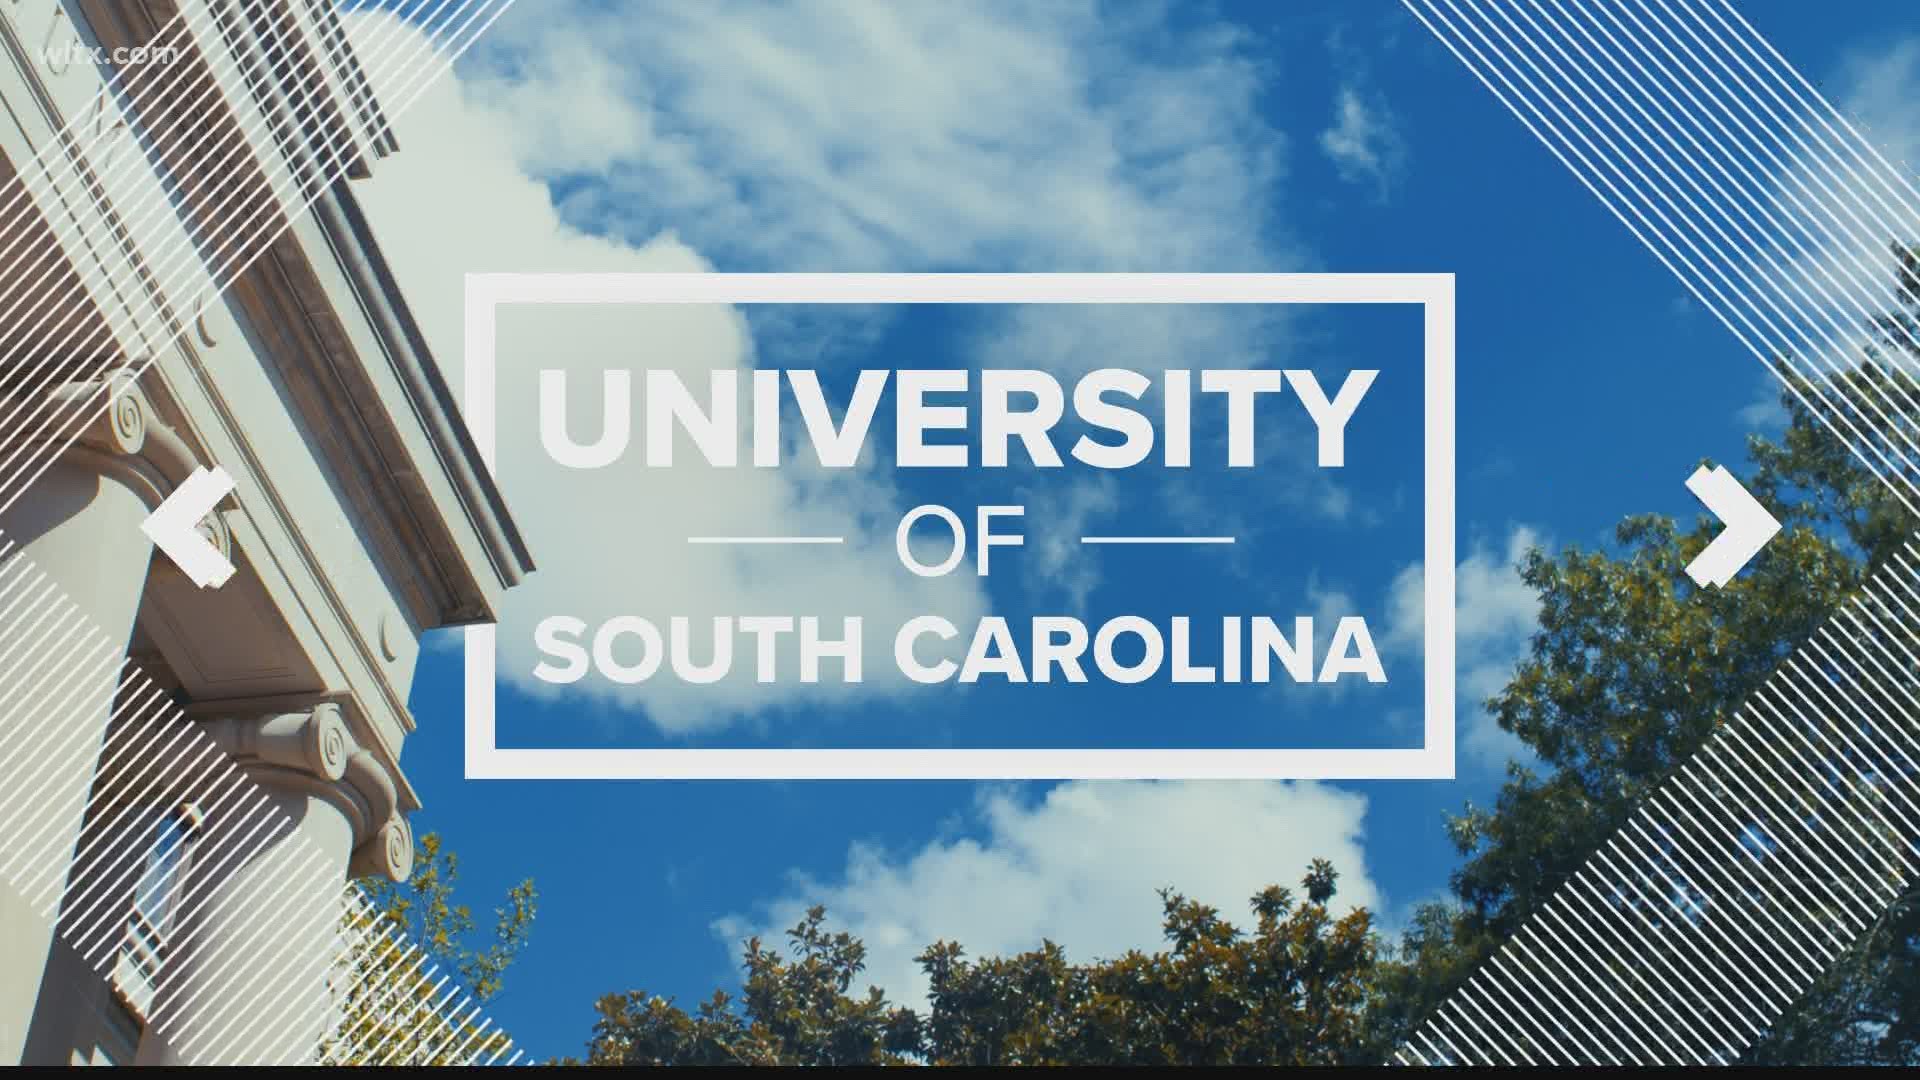 The University of South Carolina reports that 1,172 students have tested positive for COVID-19 since August 1.